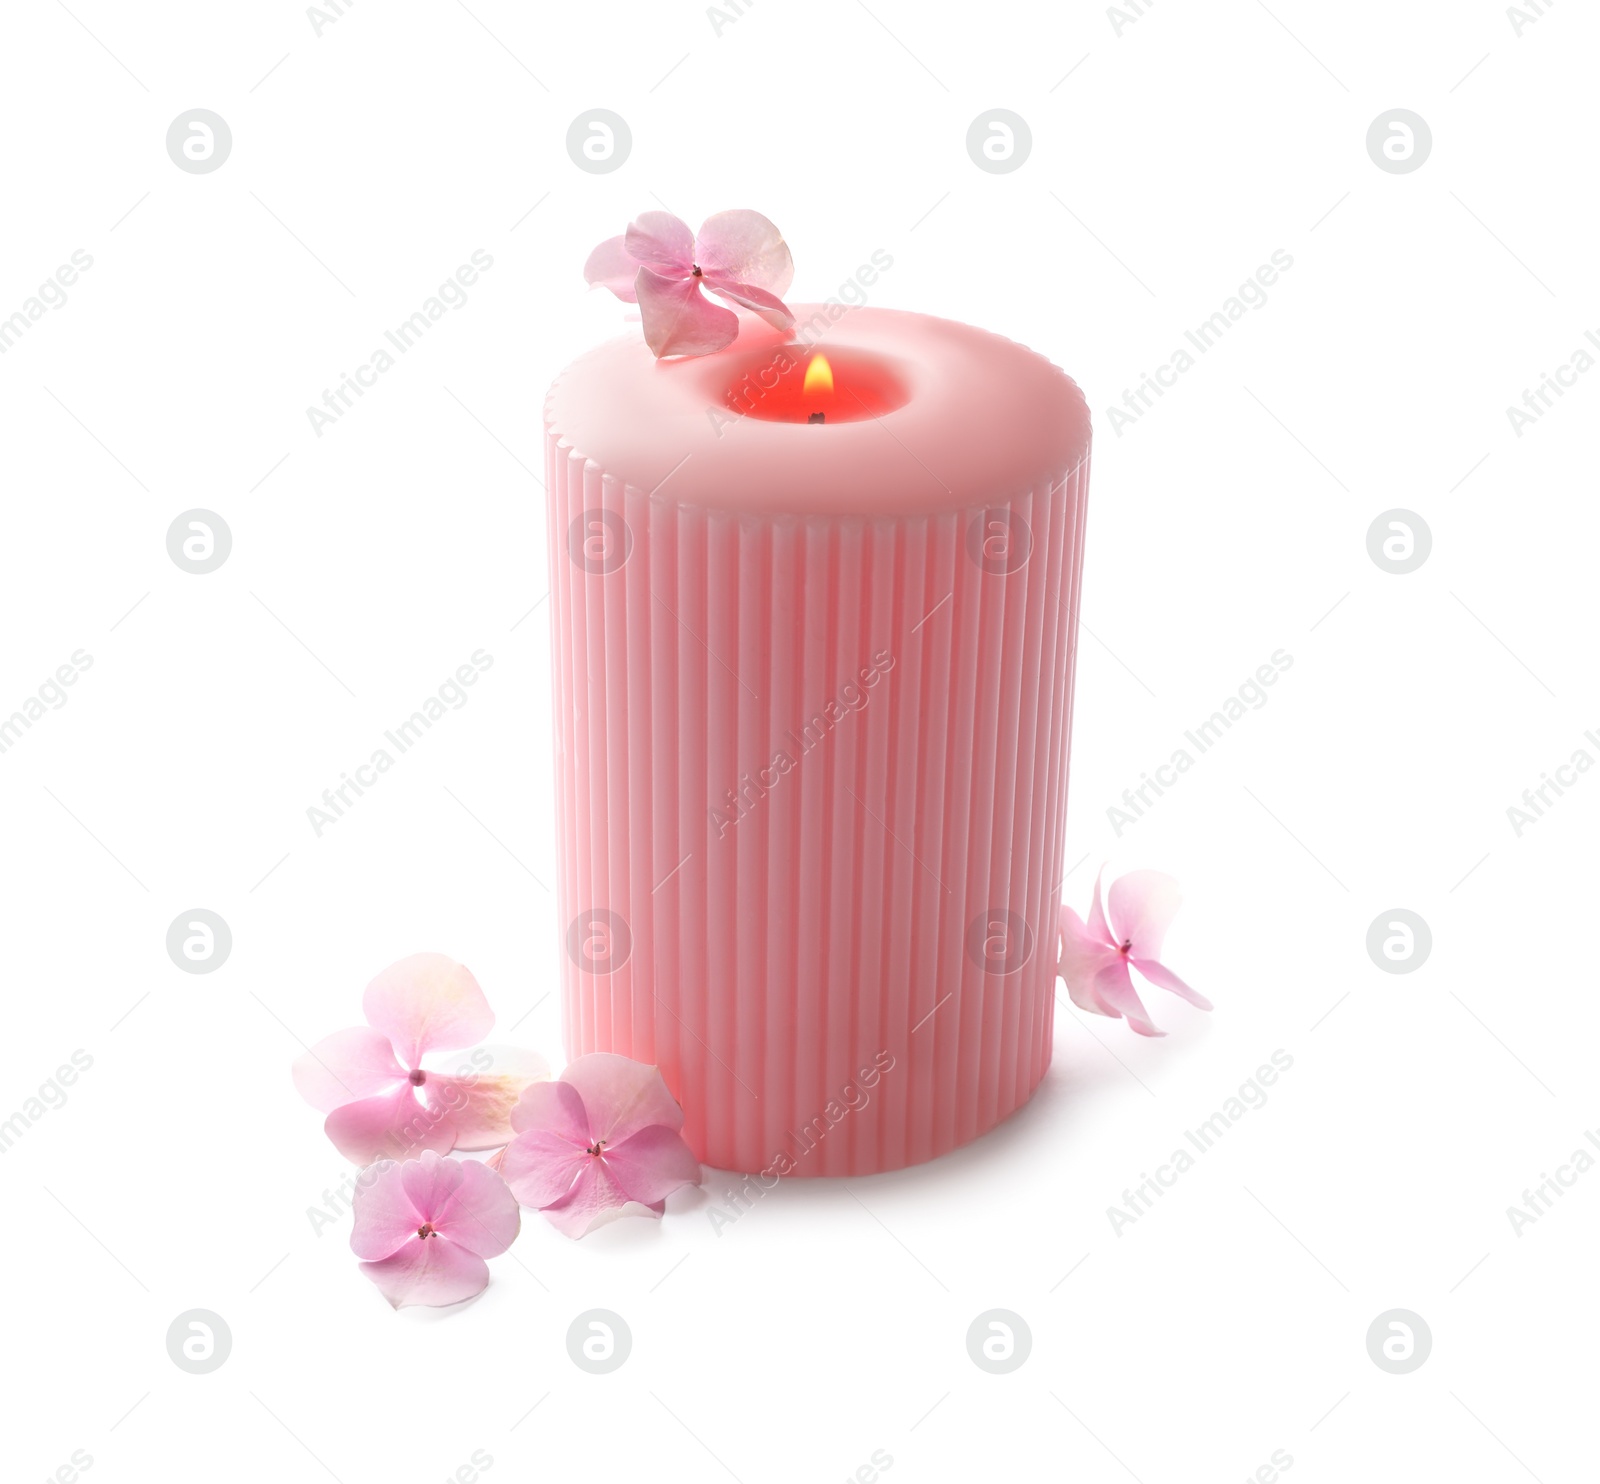 Photo of Burning pink wax candle and flowers isolated on white